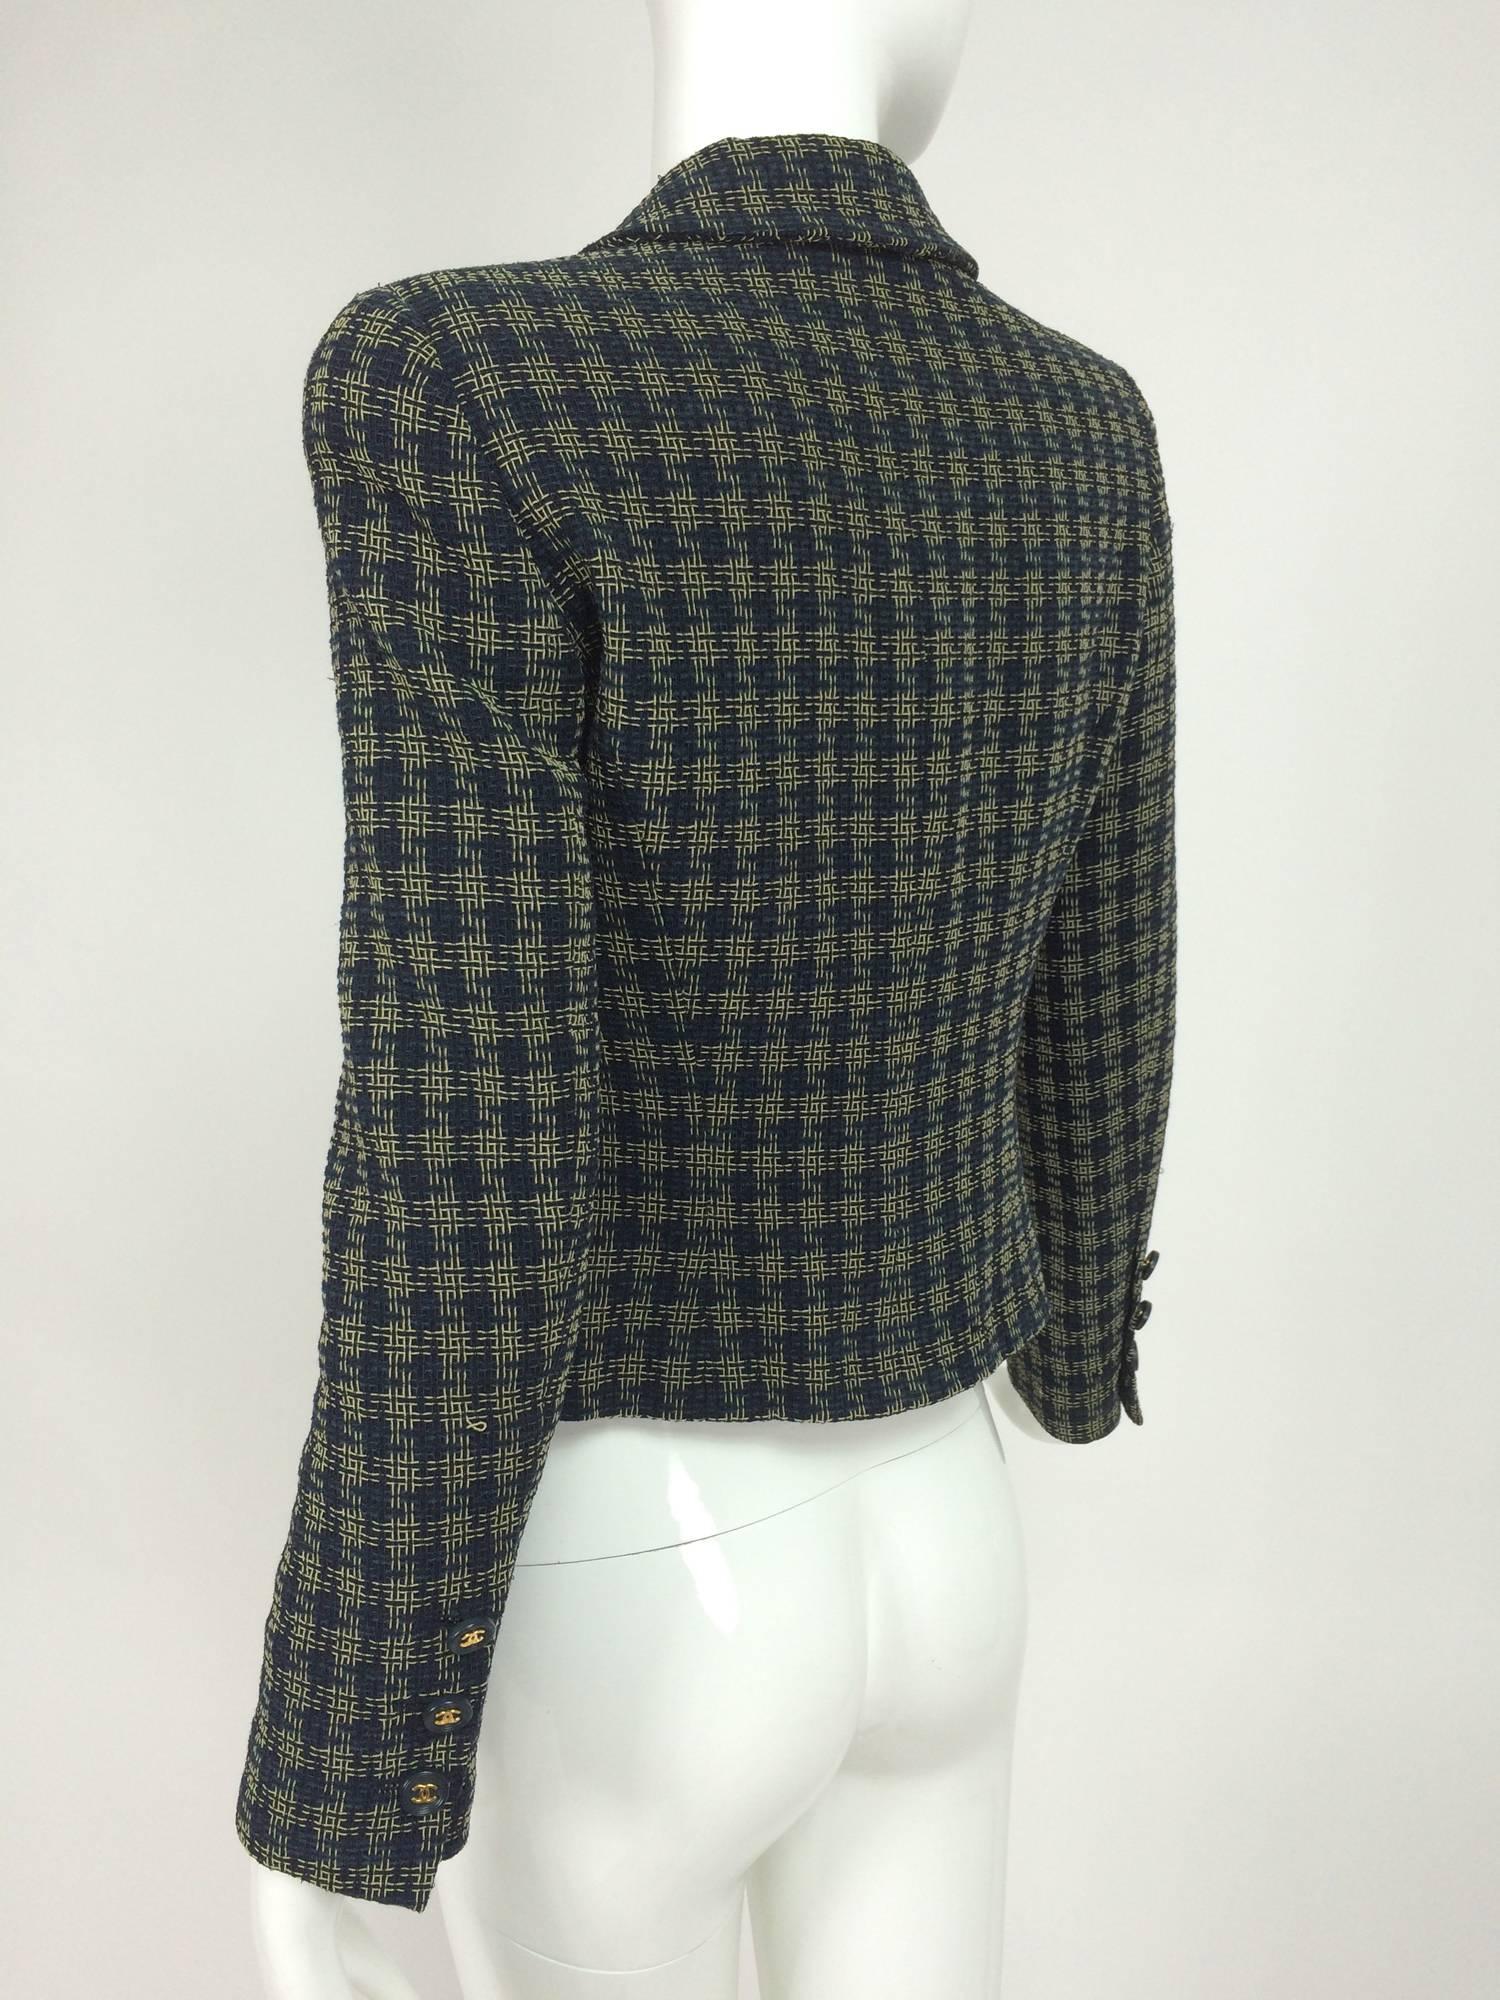 Women's Chanel navy & cream open weave check cropped jacket 